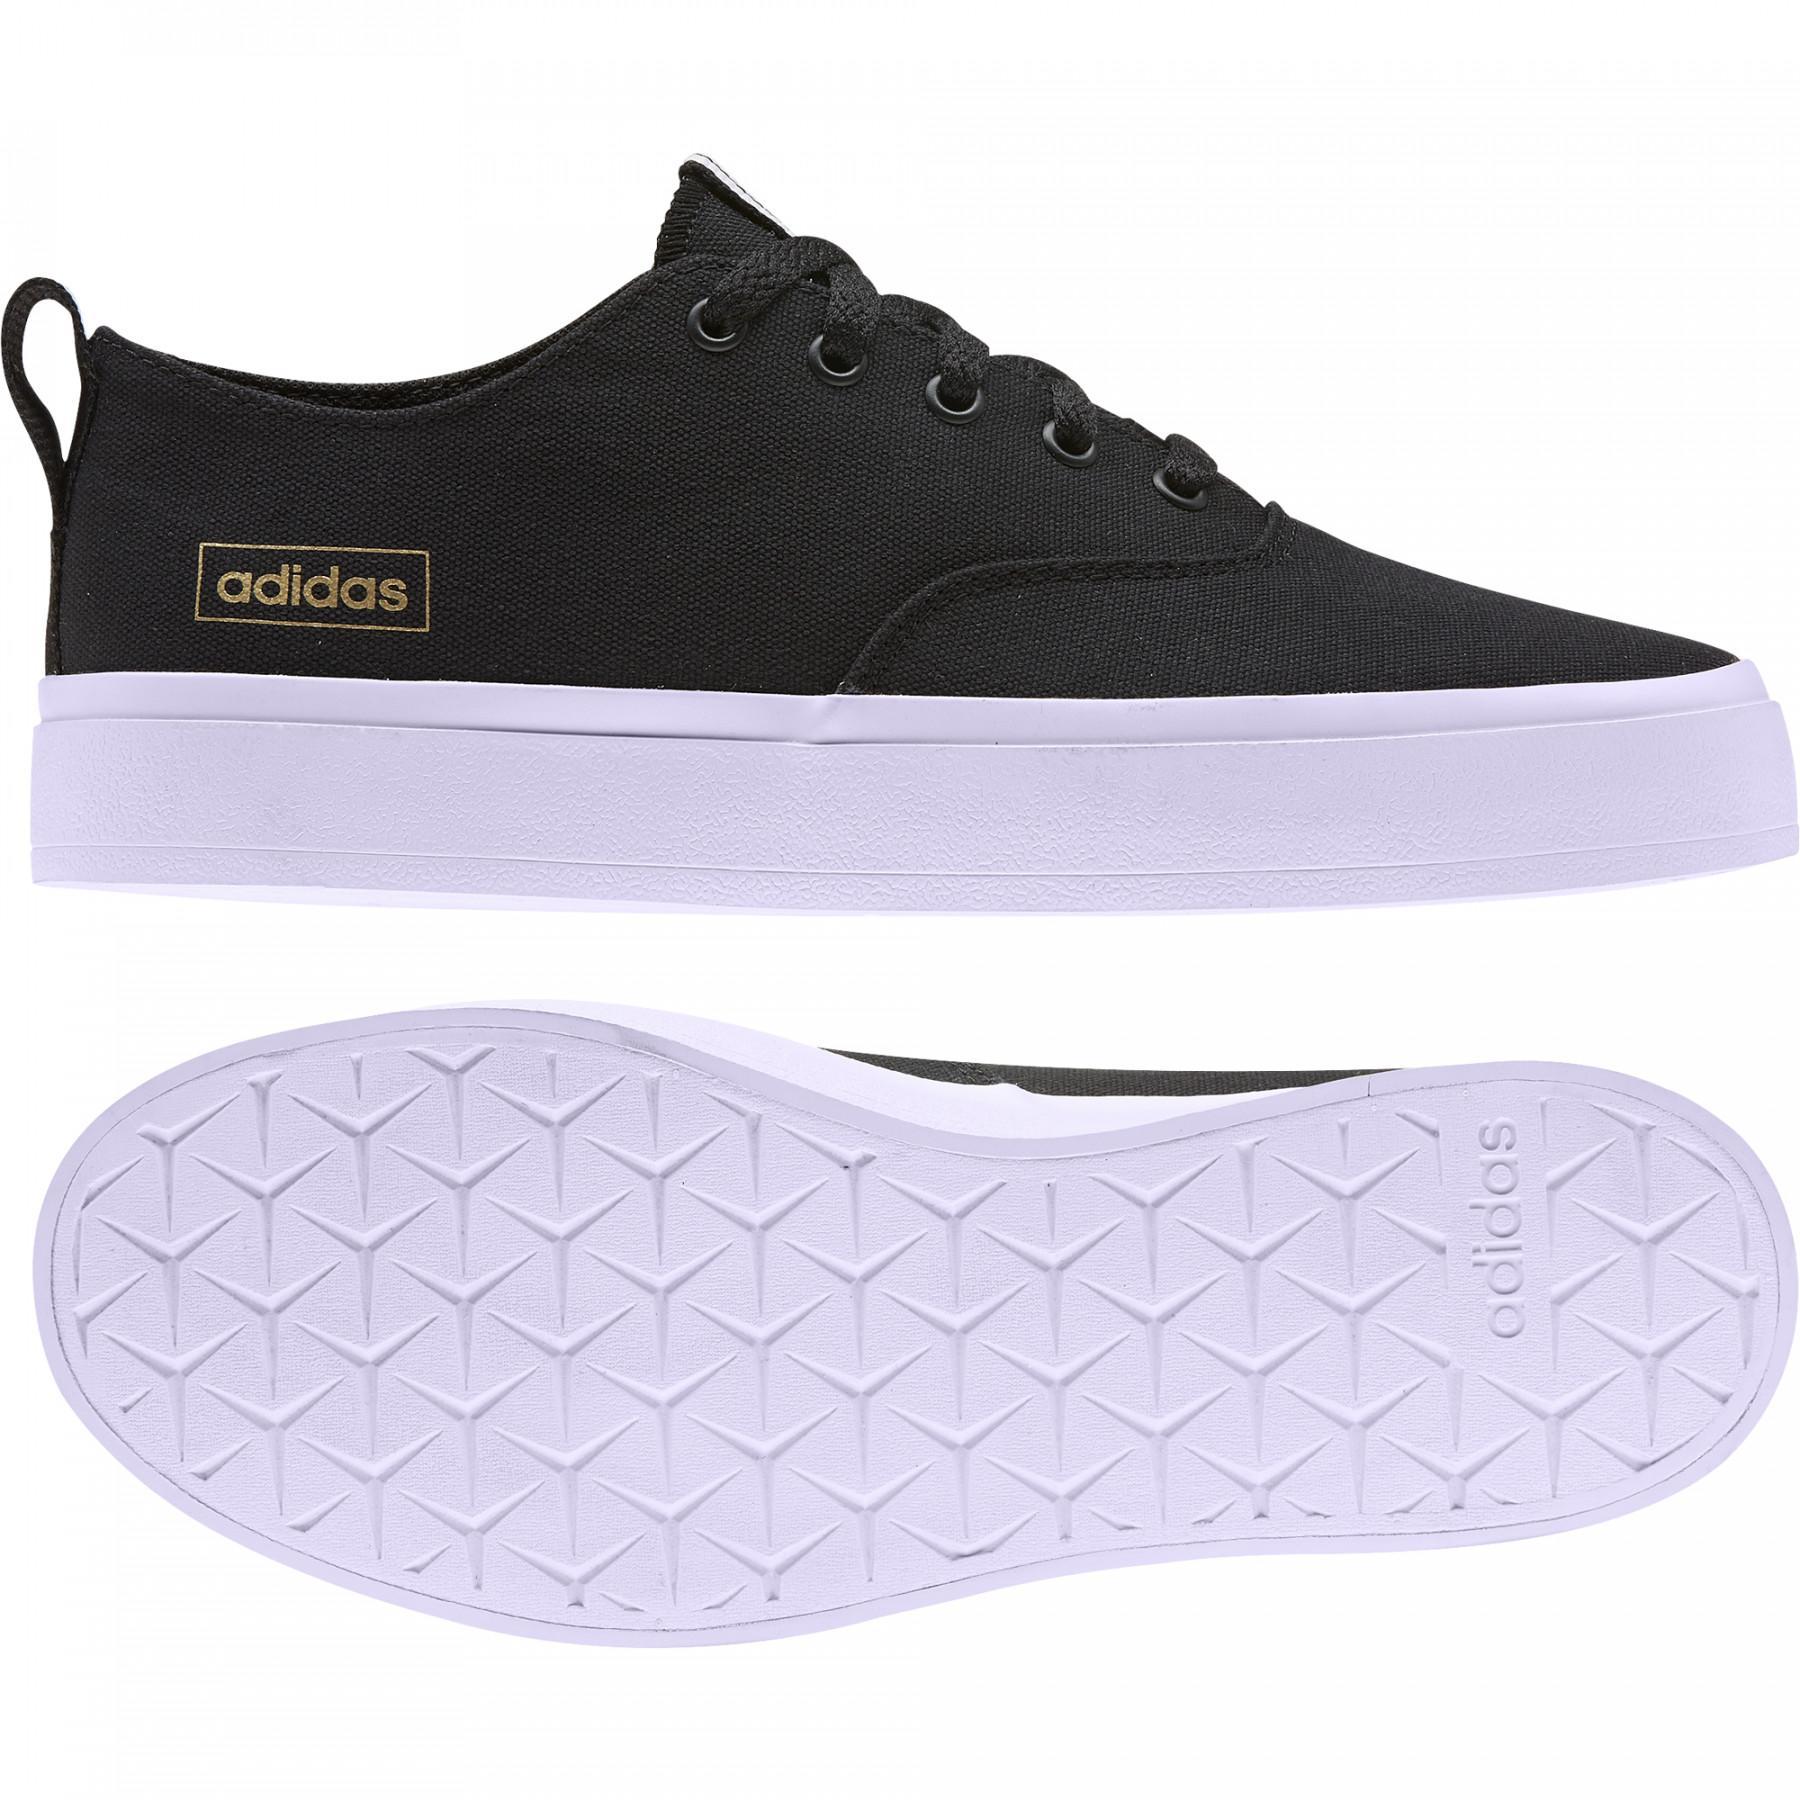 Chaussures femme adidas Broma